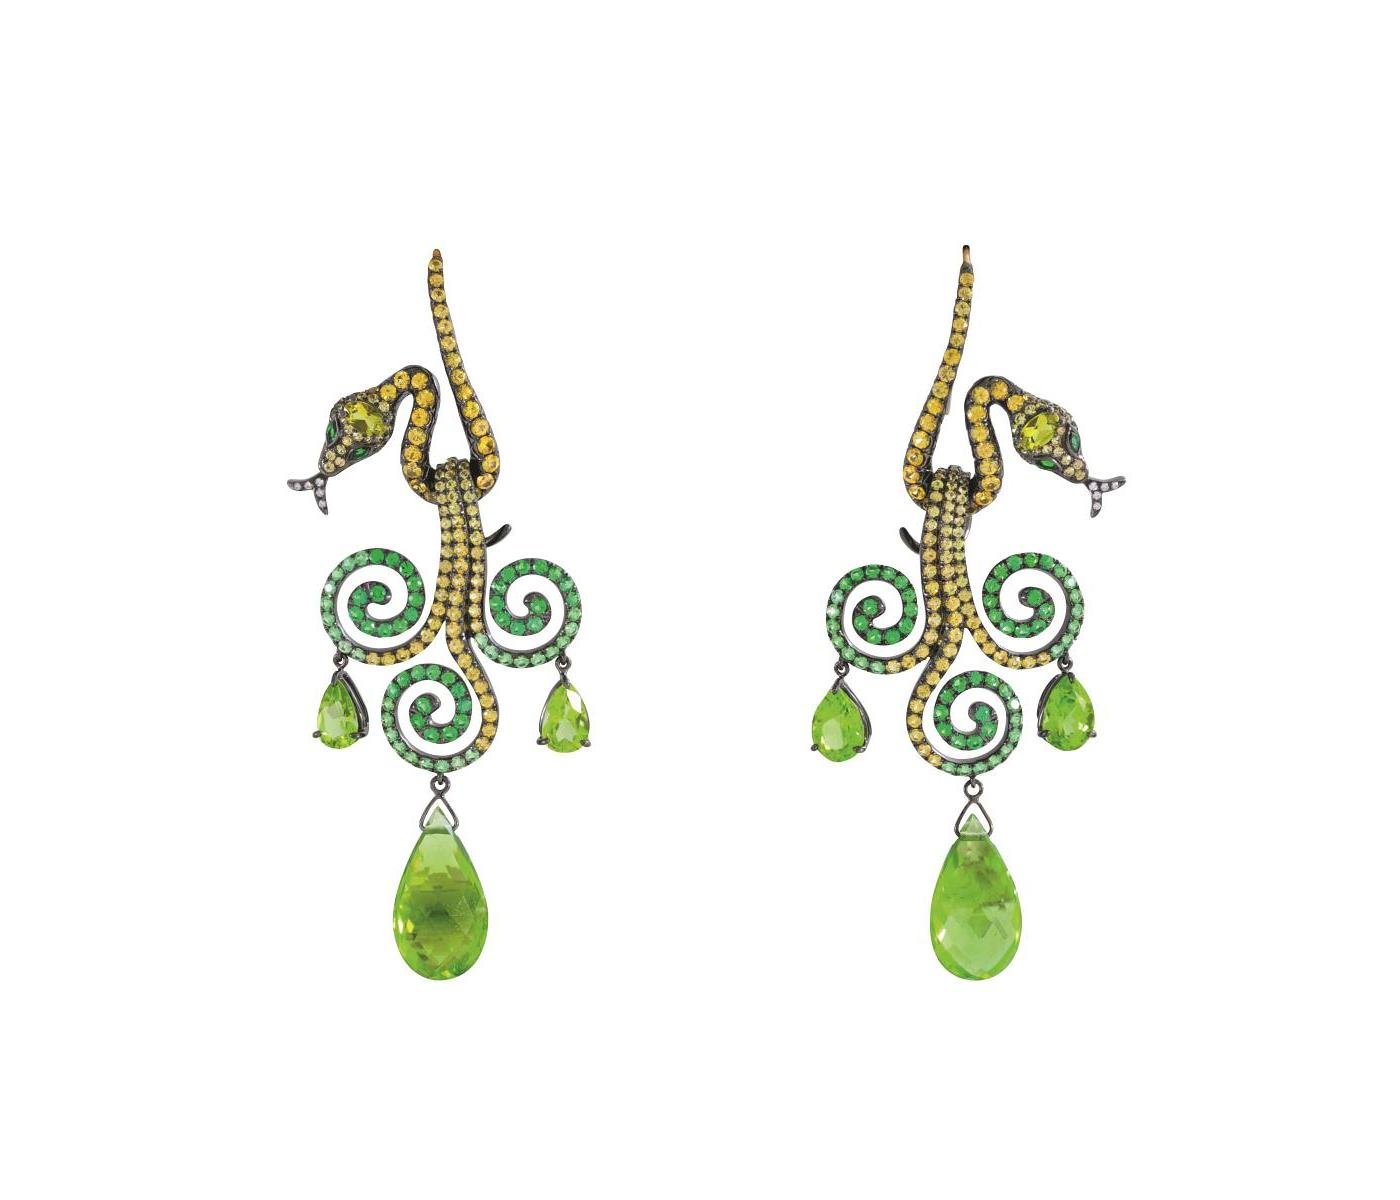 Earrings by Lydia Courteille